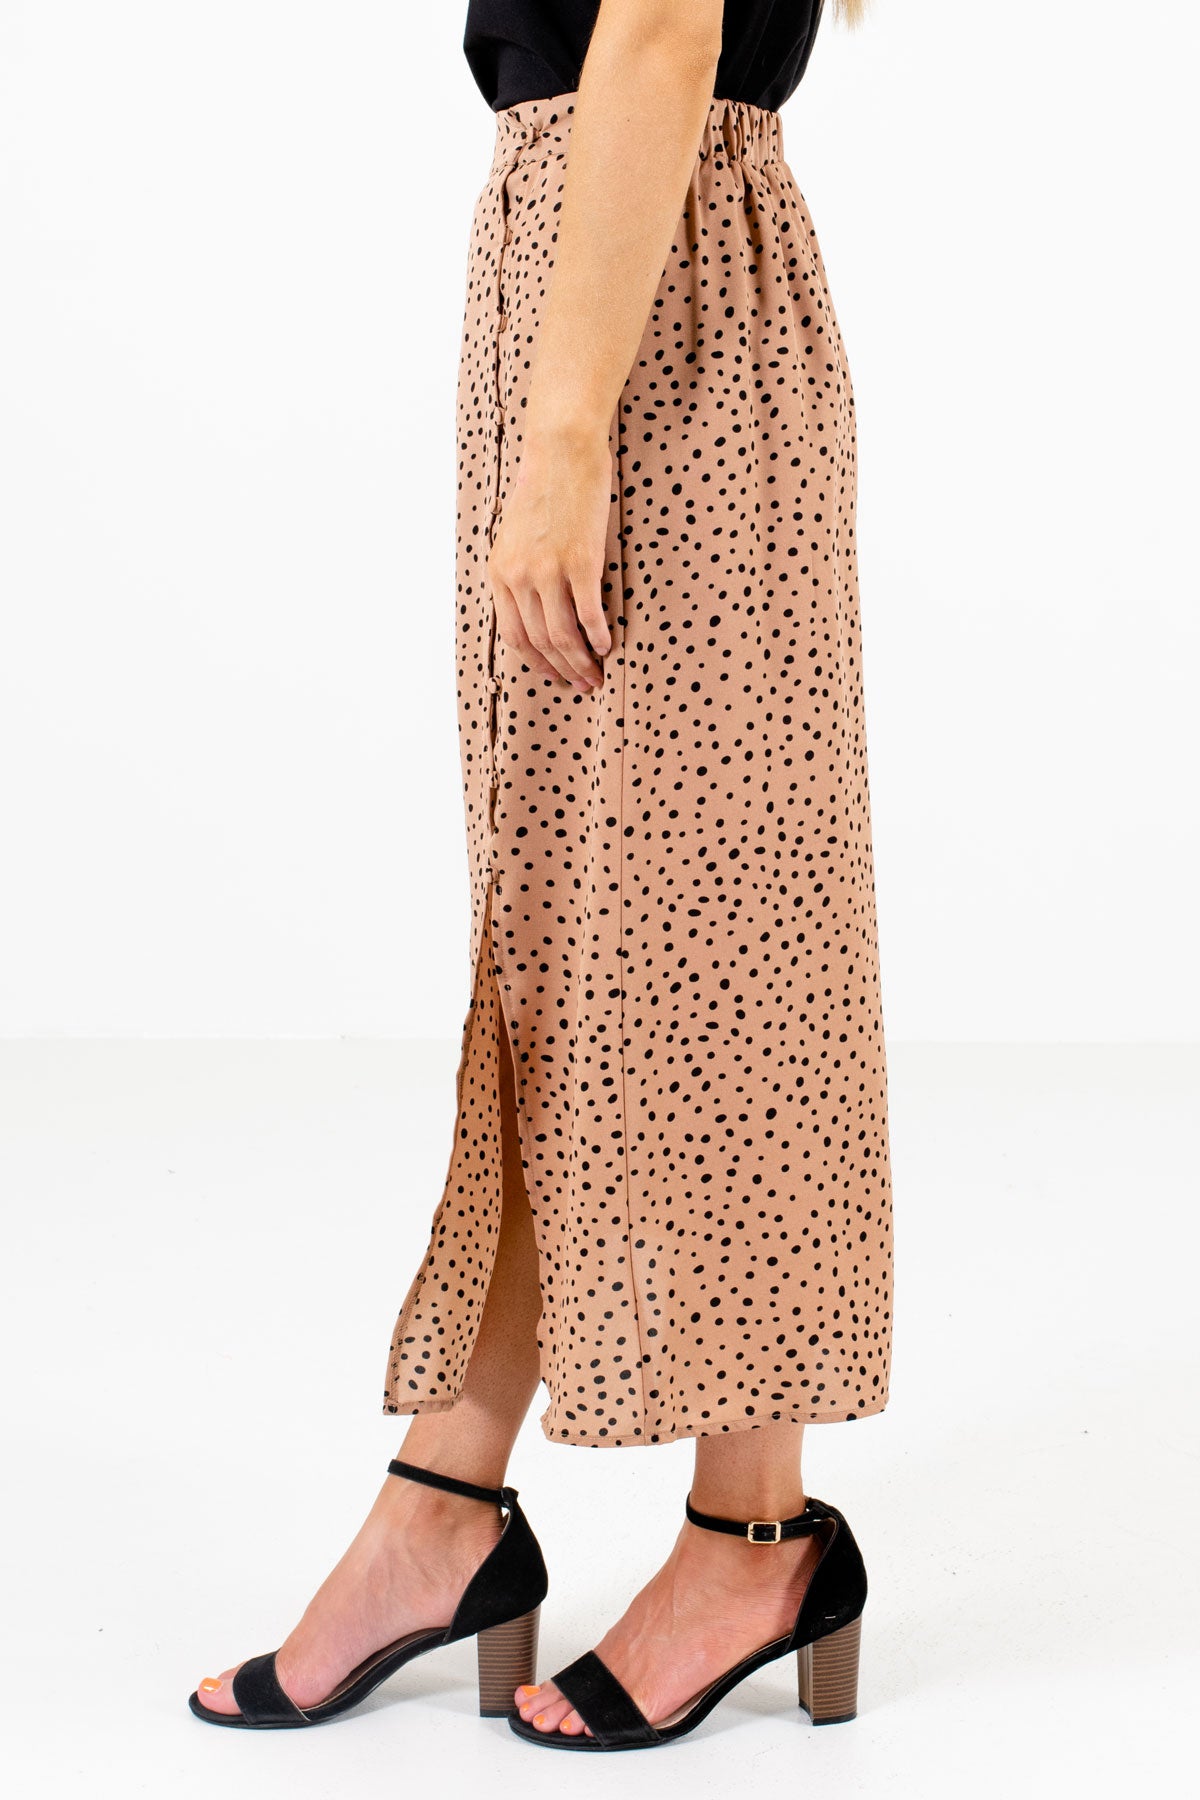 Tan Brown Button-Up Side Boutique Midi Skirts for Women